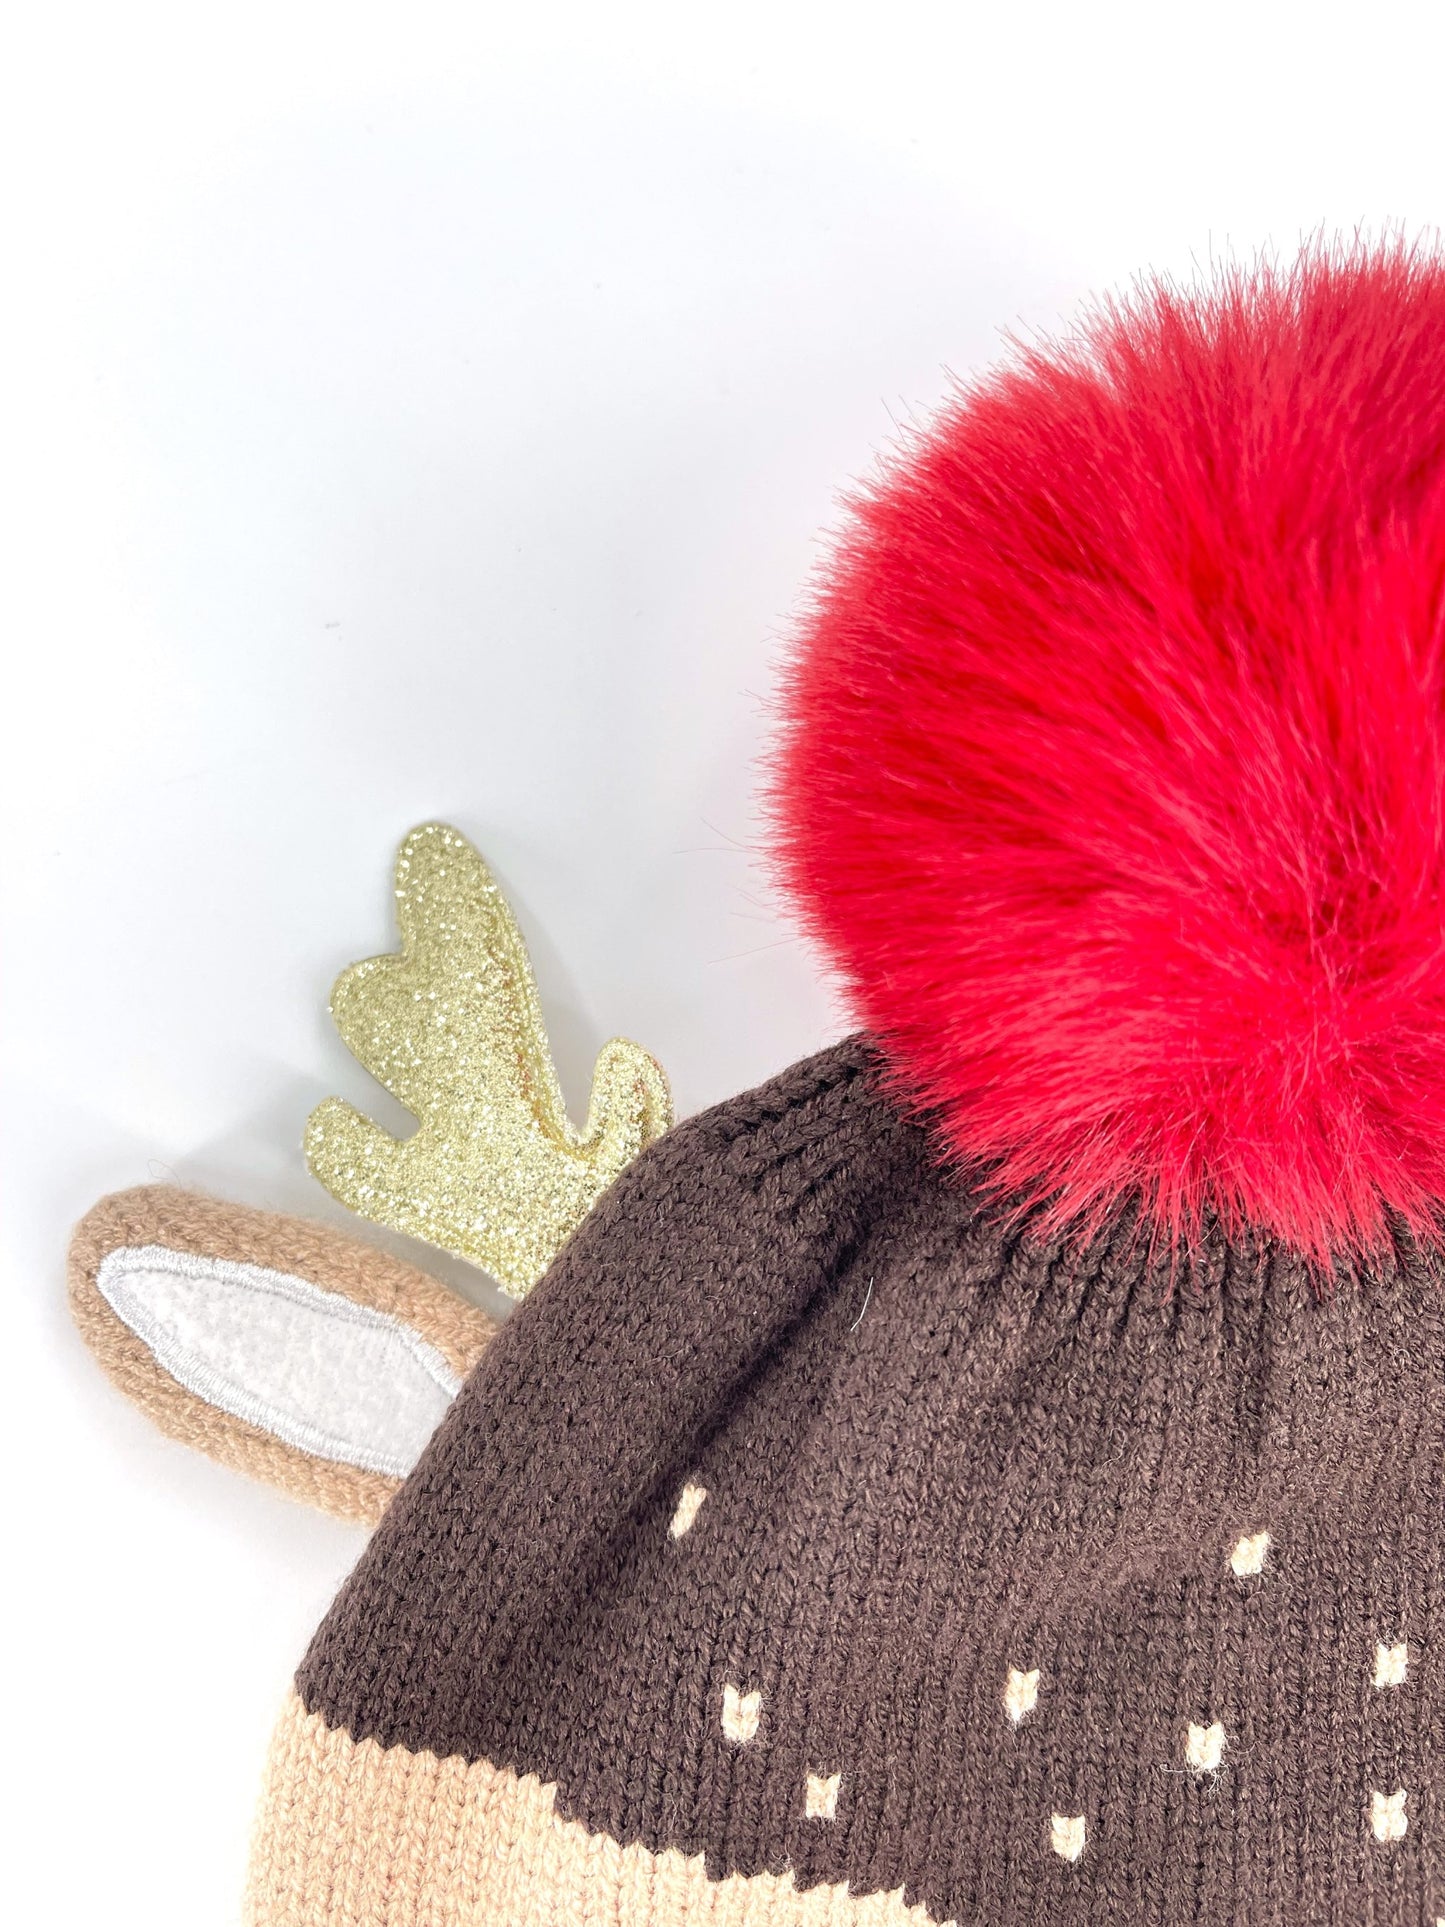 Childrens Christmas Bobble Hat Rudolph the Red Nosed Reindeer with Sparky Antlers and Faux Fur Pom-Pom